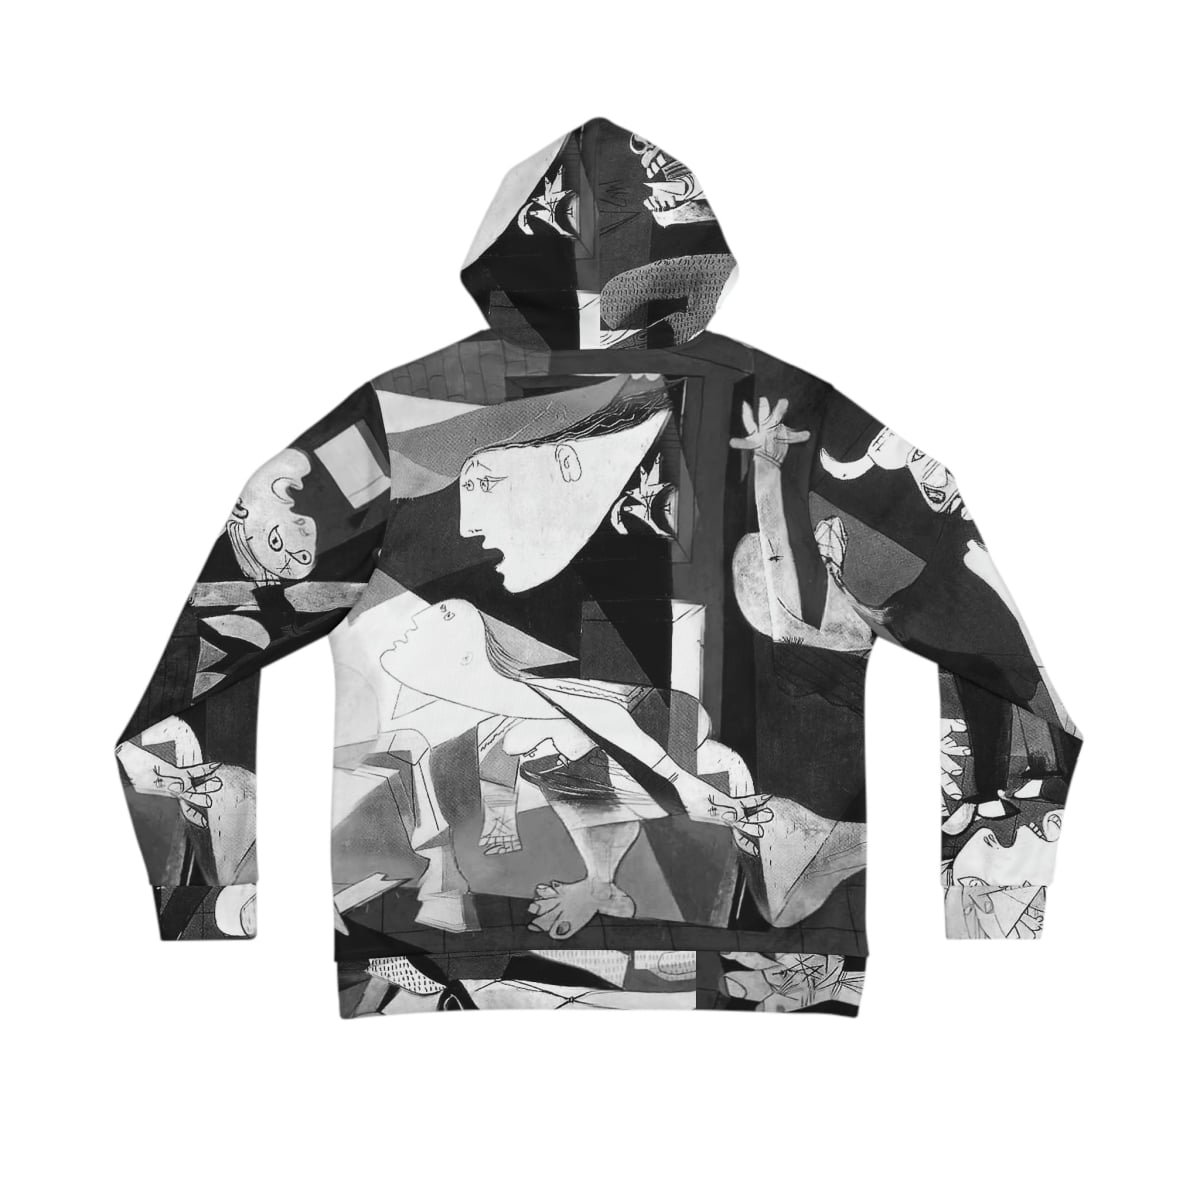 Guernica by Pablo Picasso Art Hoodie